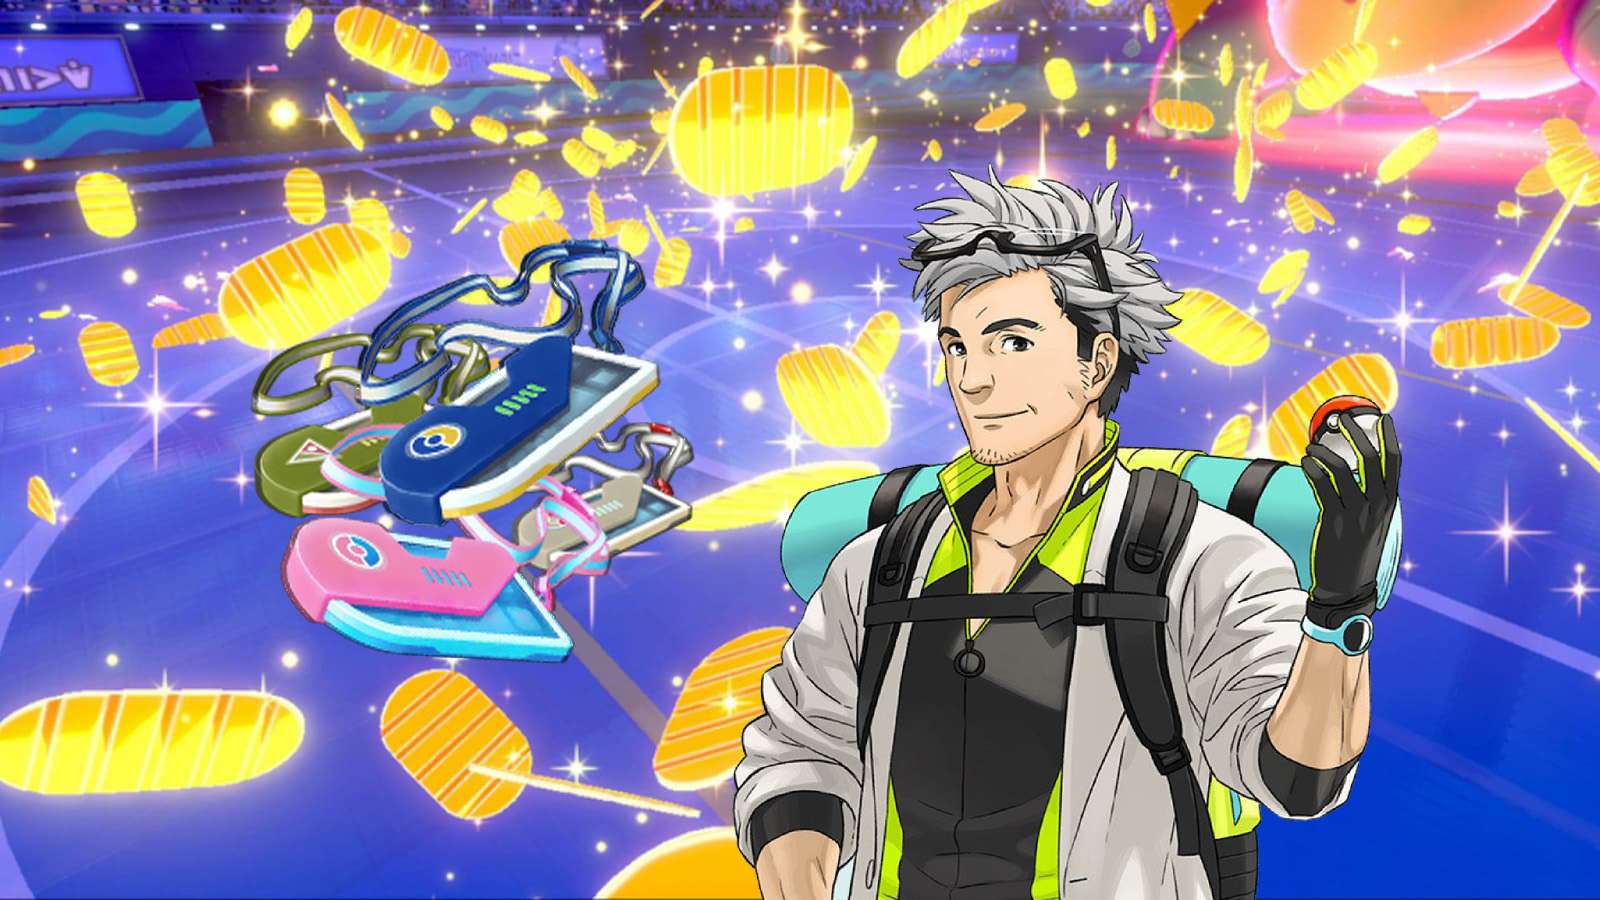 Professor Willow and Pokemon Go Tickets in front of money